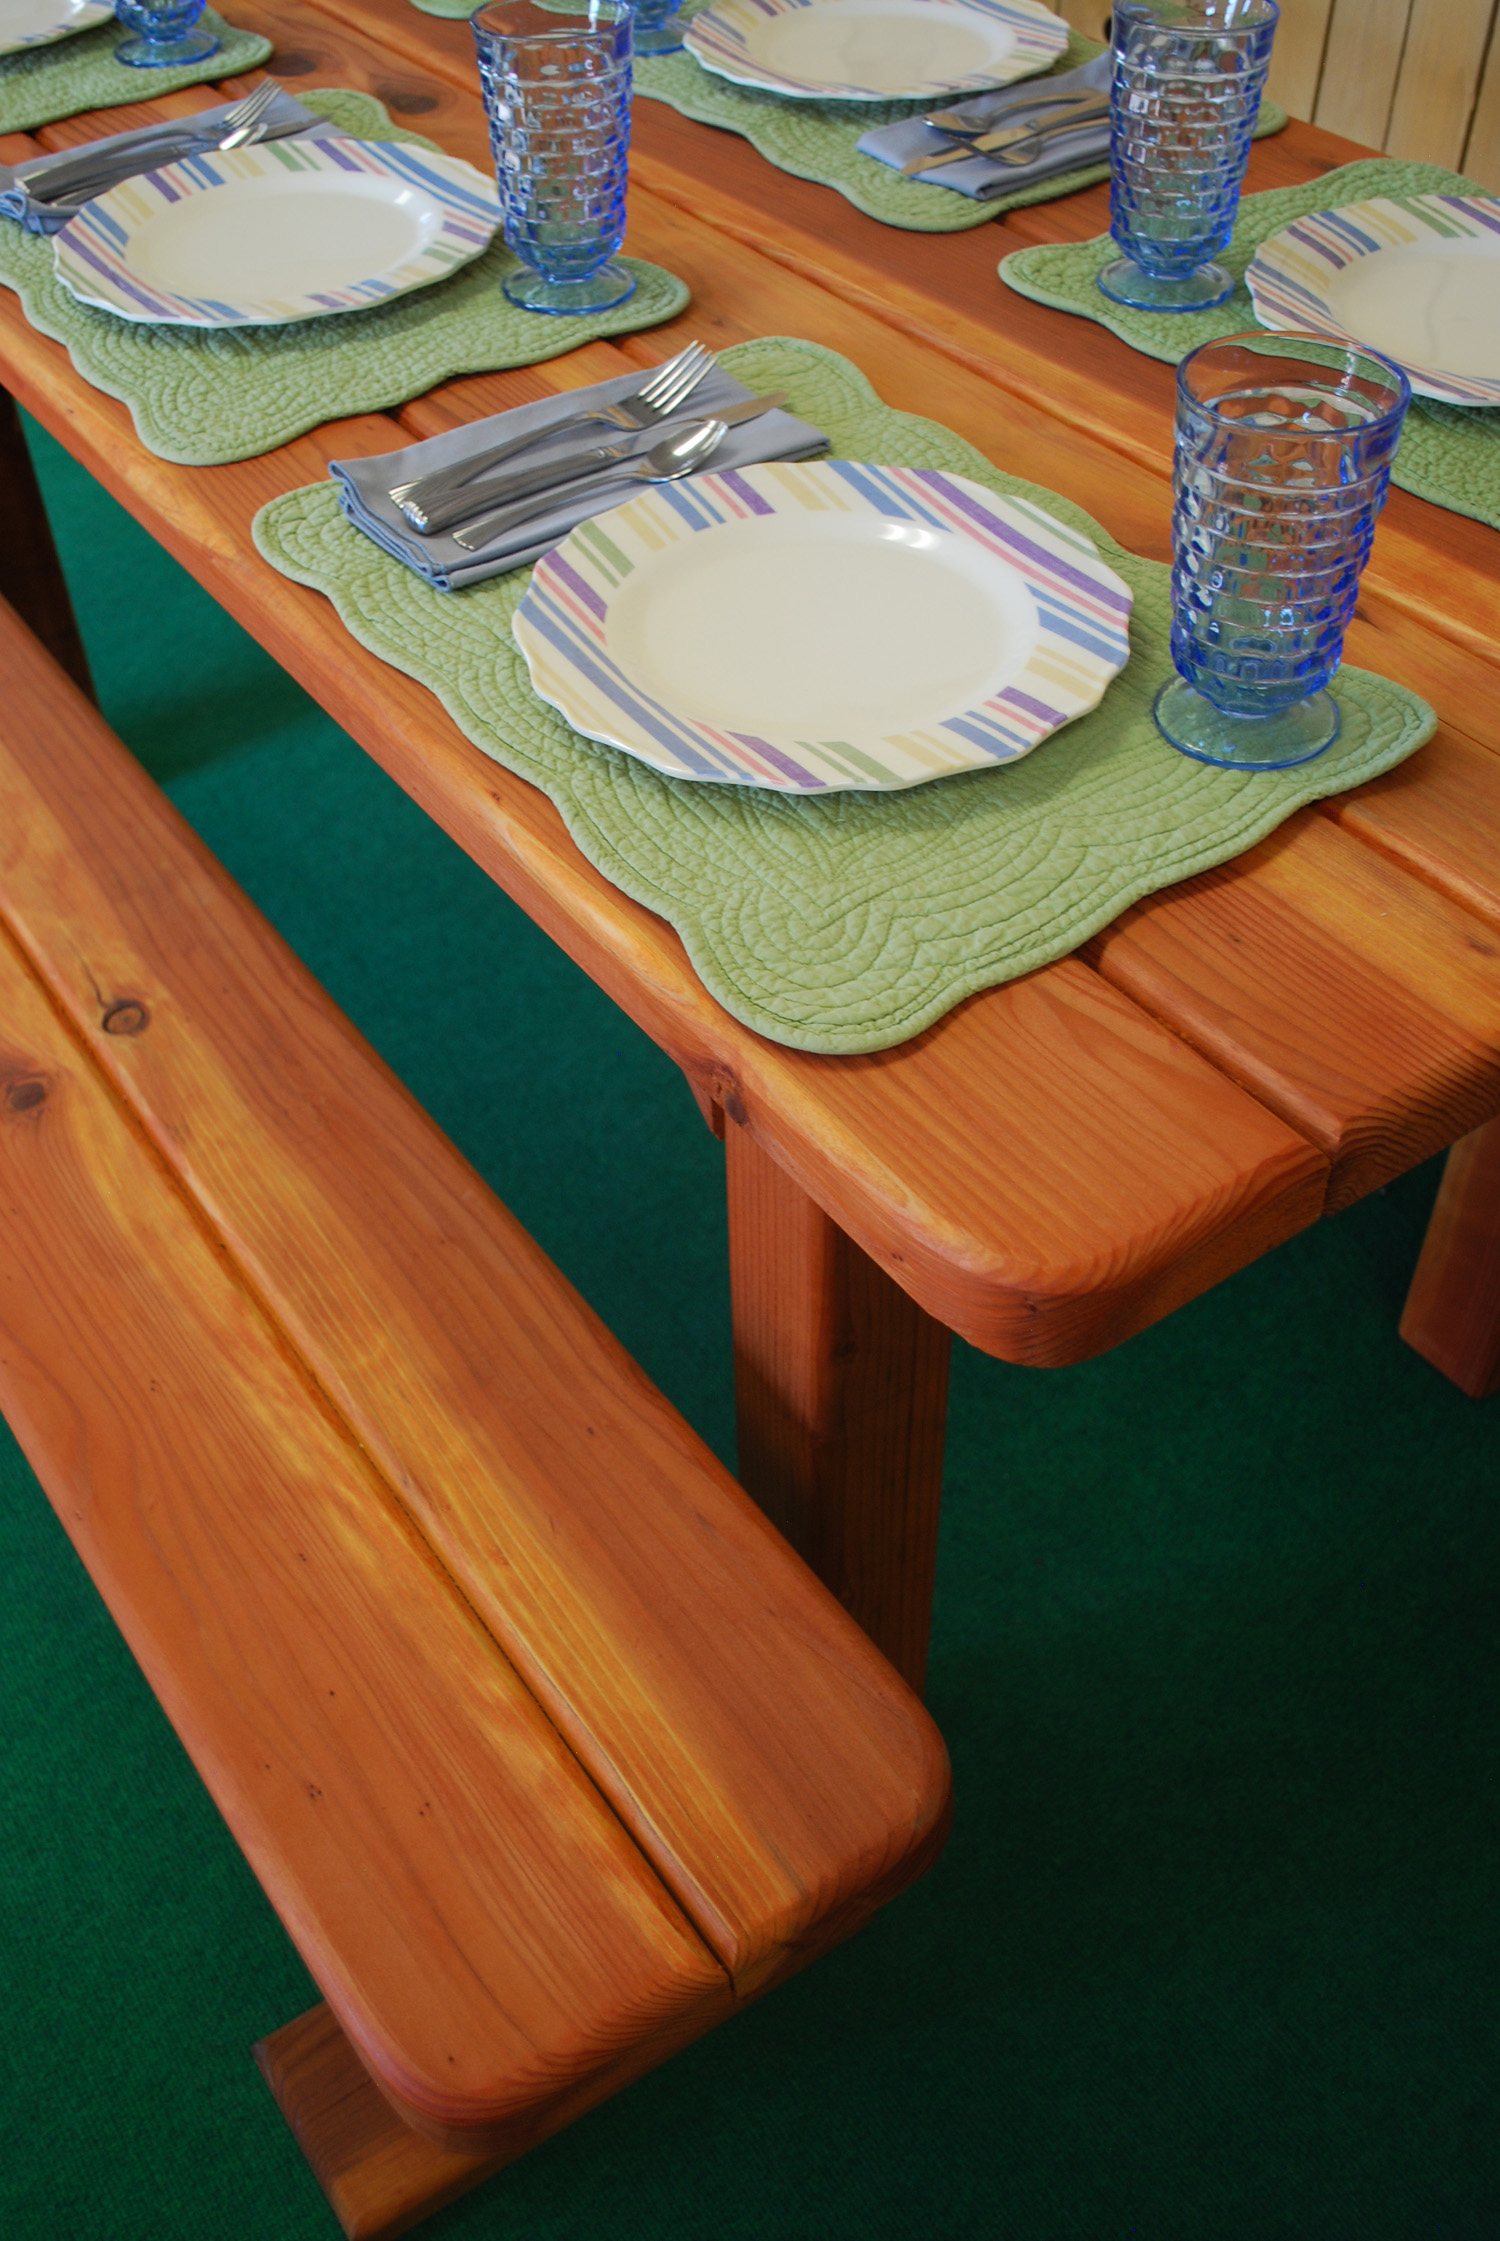 72" redwood rectangle picnic table